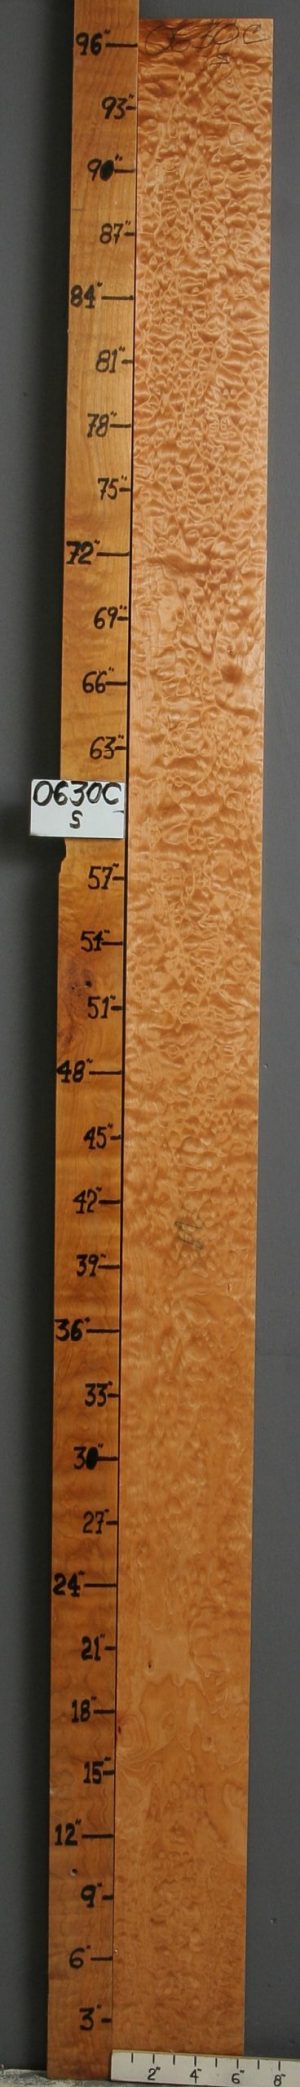 MUSICAL QUILTED MAPLE LUMBER 6"1/4 X 97" X 4/4 (NWT-0630C)